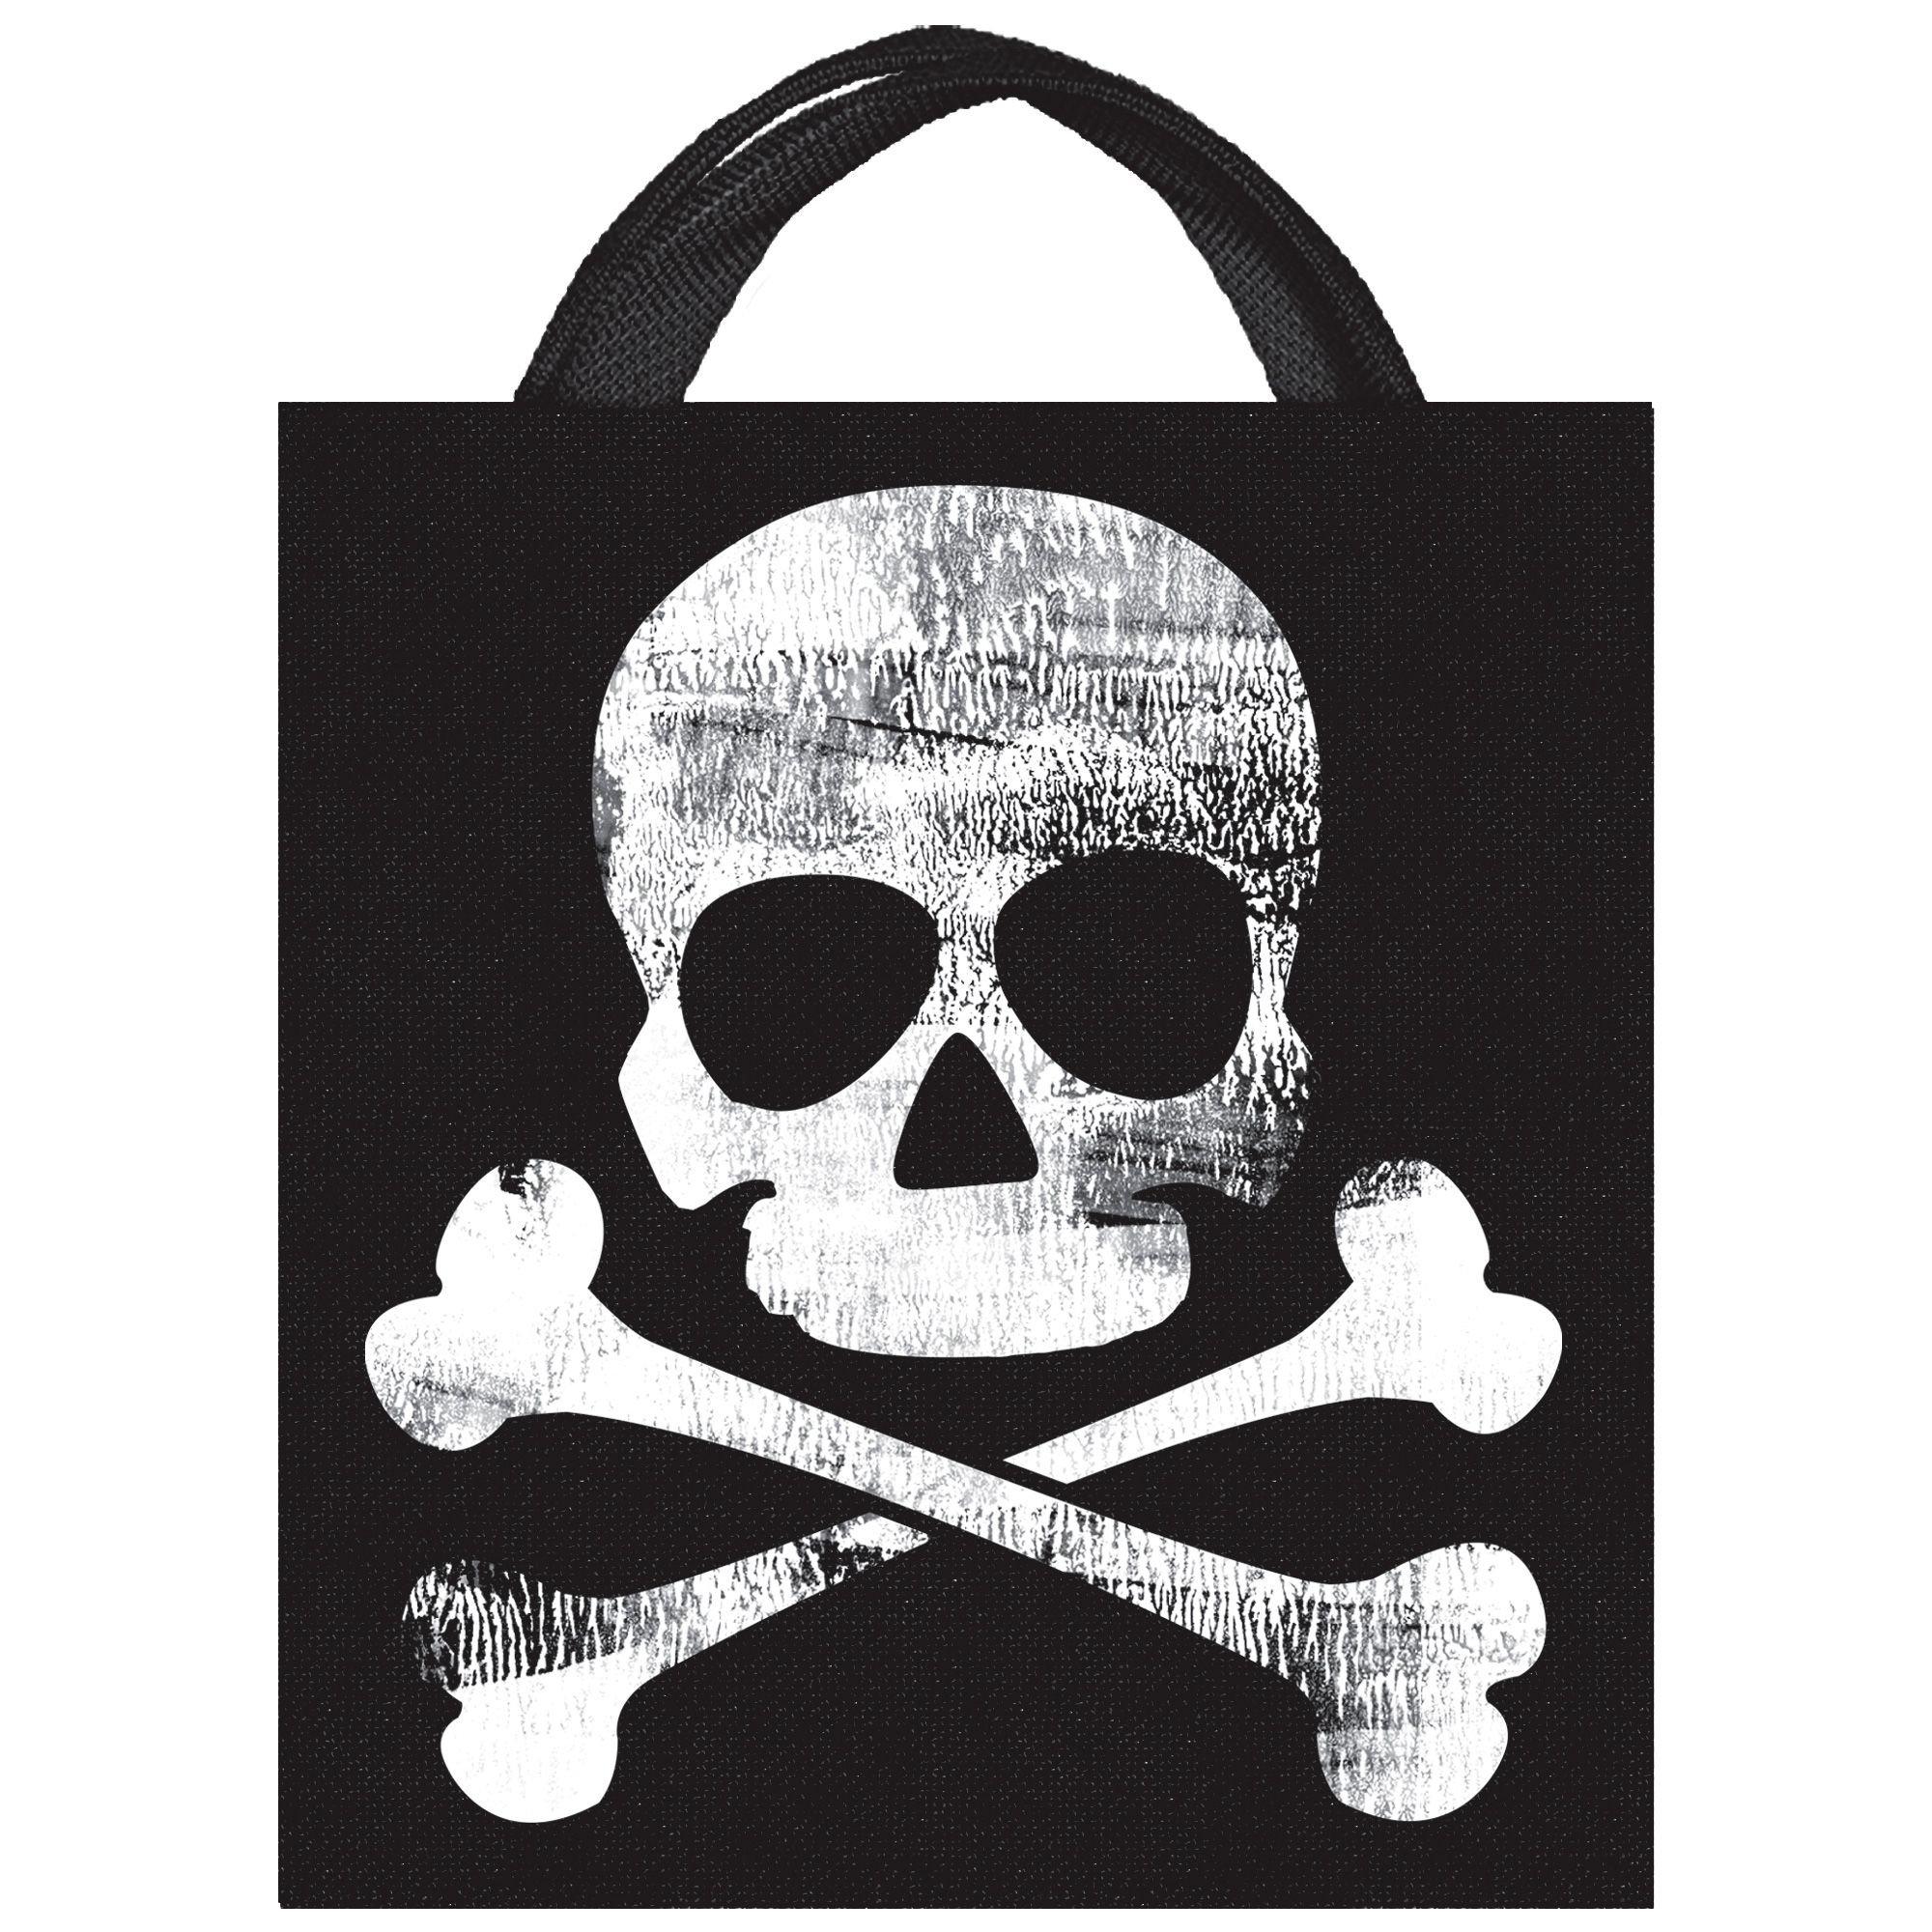 Awkward Styles Jolly Roger Skull Bag Jolly Roger Bag Pirate Crossbones Day of Dead Skull Accessories Gothic Gifts for He Dia de Los Muertos